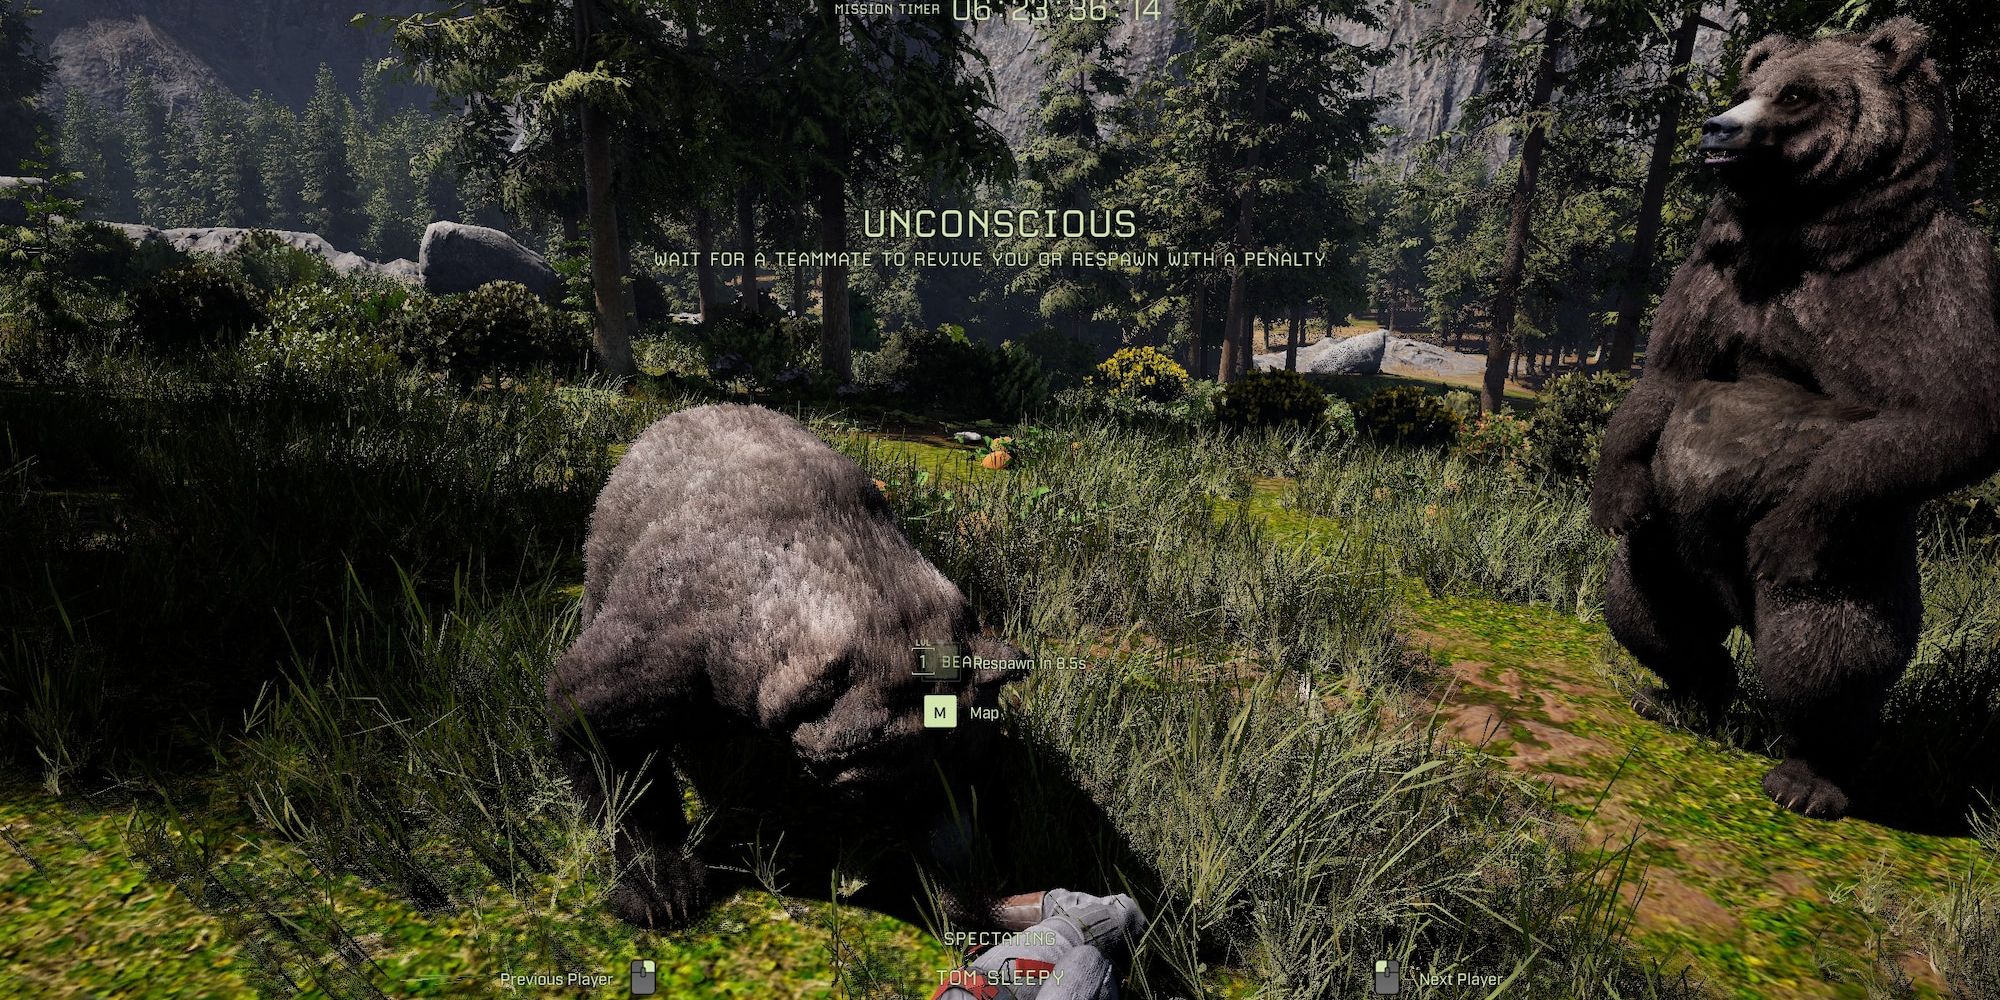 player killed by two bears on unconscious screen